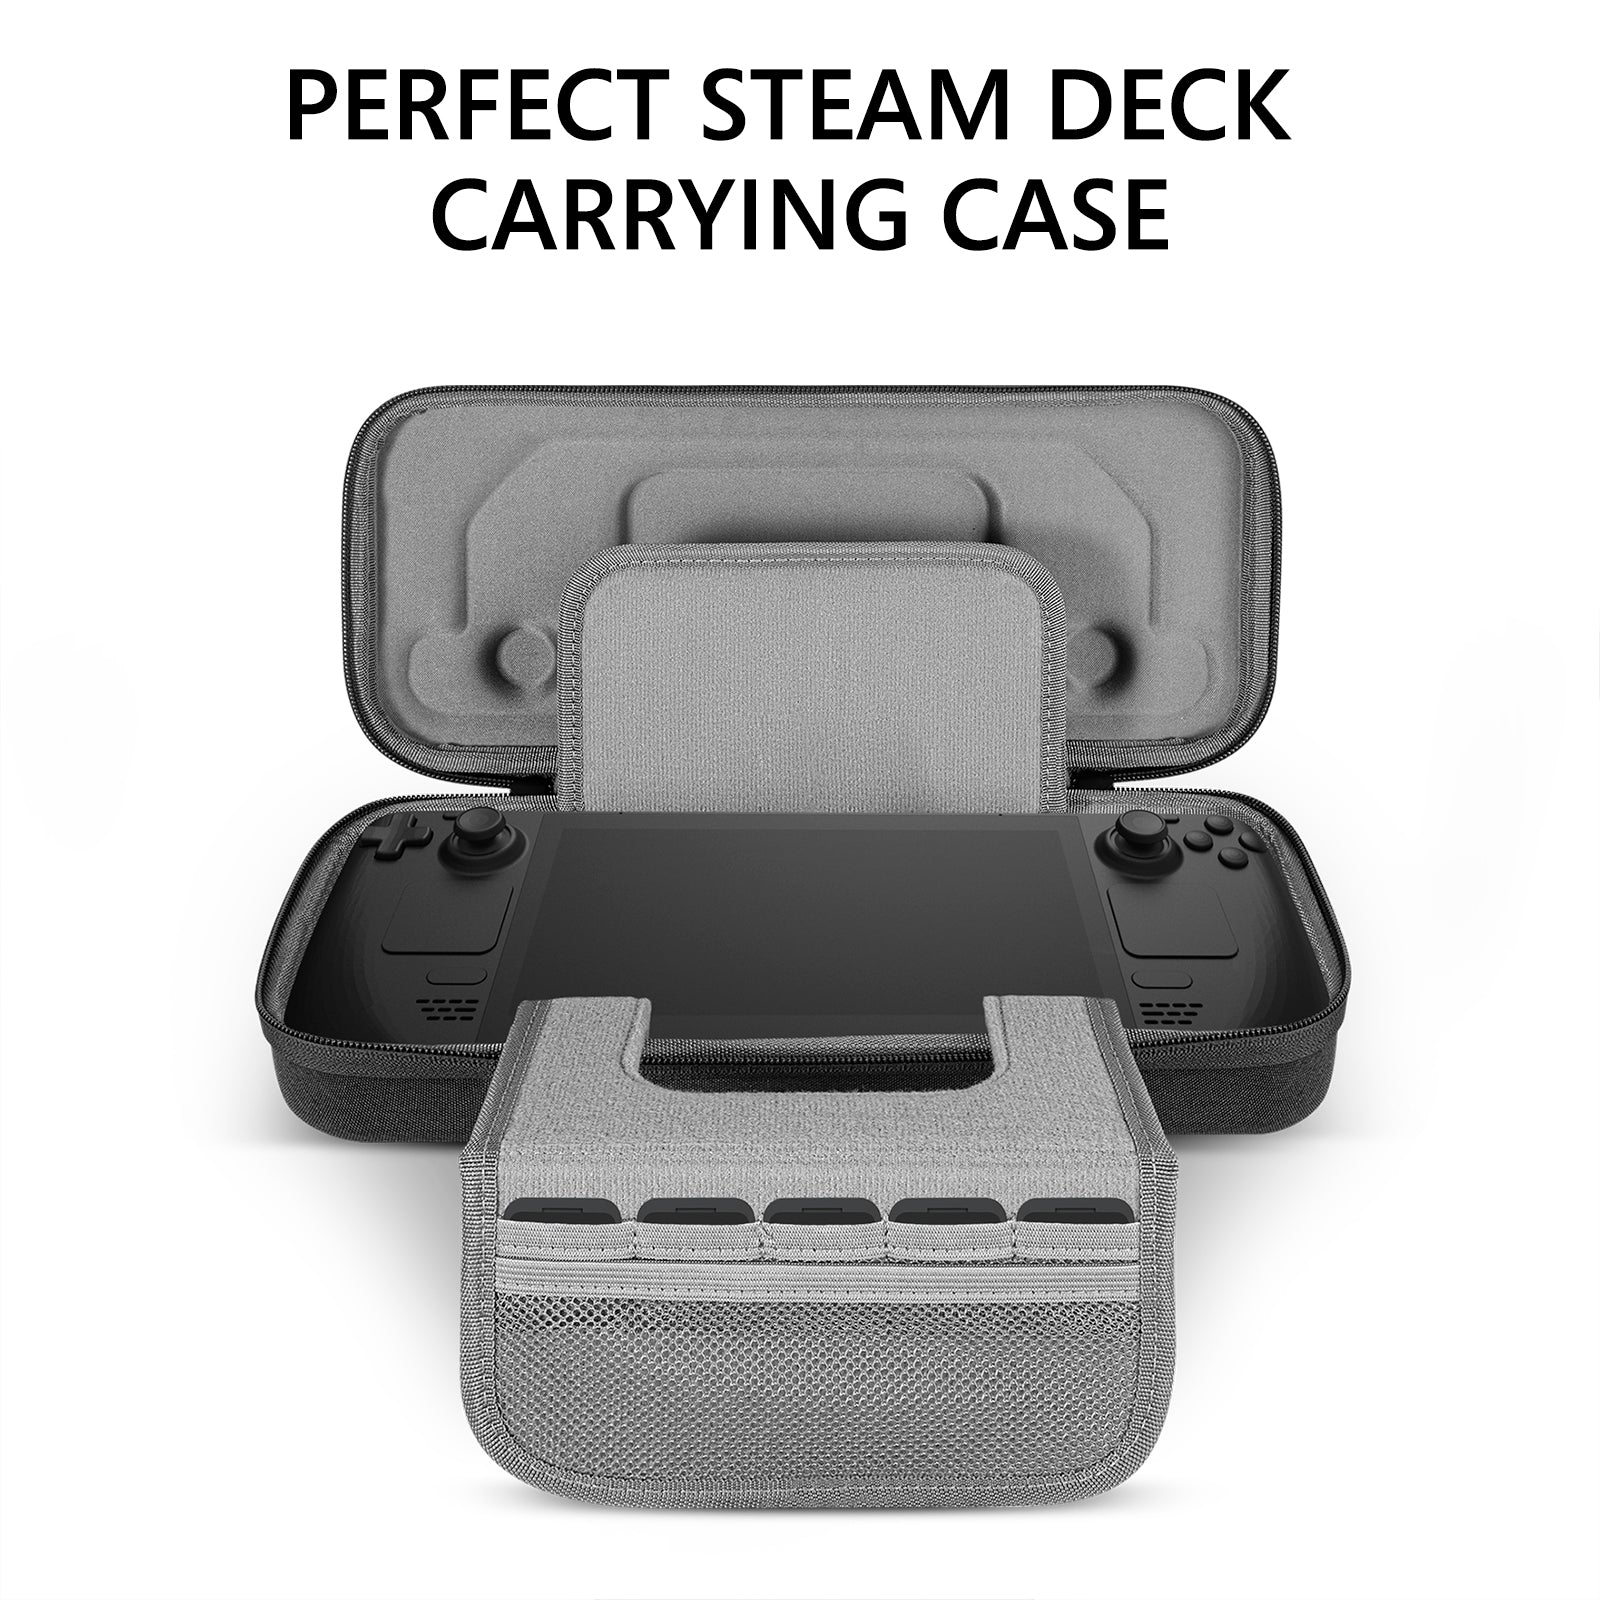 Soft Shell Storage Case For Valve Steam Deck Game Console Portable Travel  Case Cover For Steam Deck Accessories